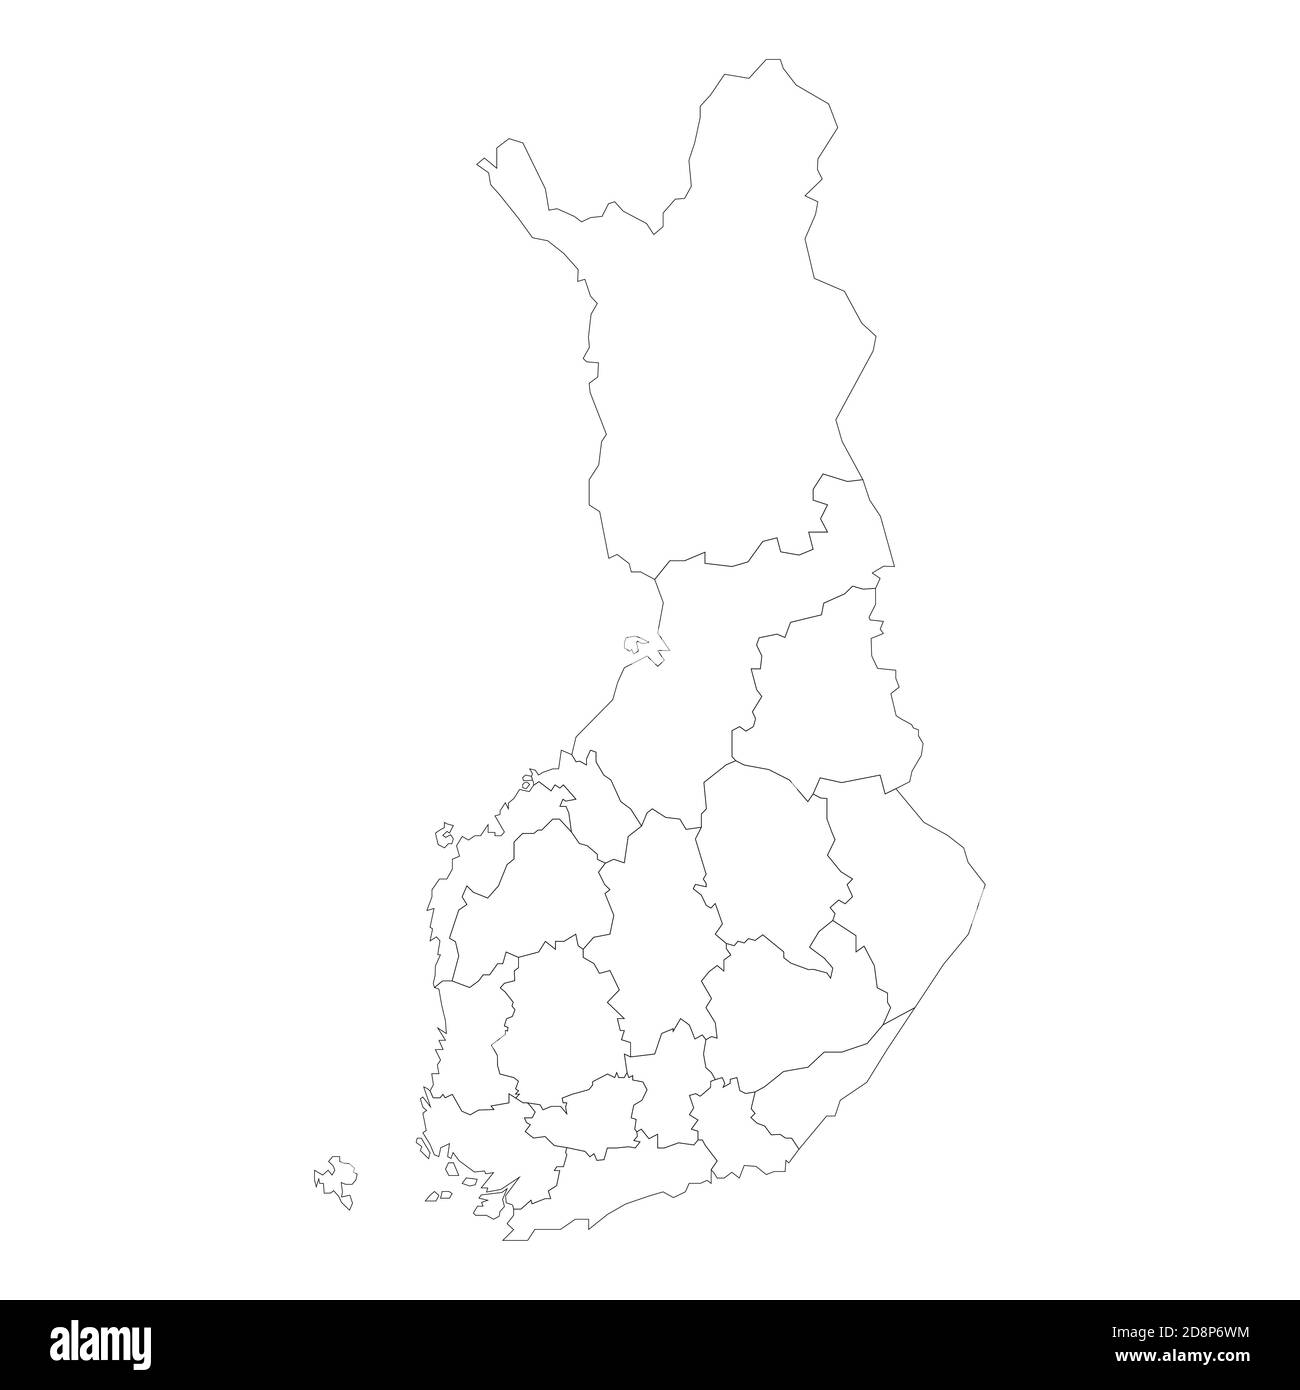 Blank political map of Finland. Administrative divisions - regions. Simple black outline vector map Stock Vector